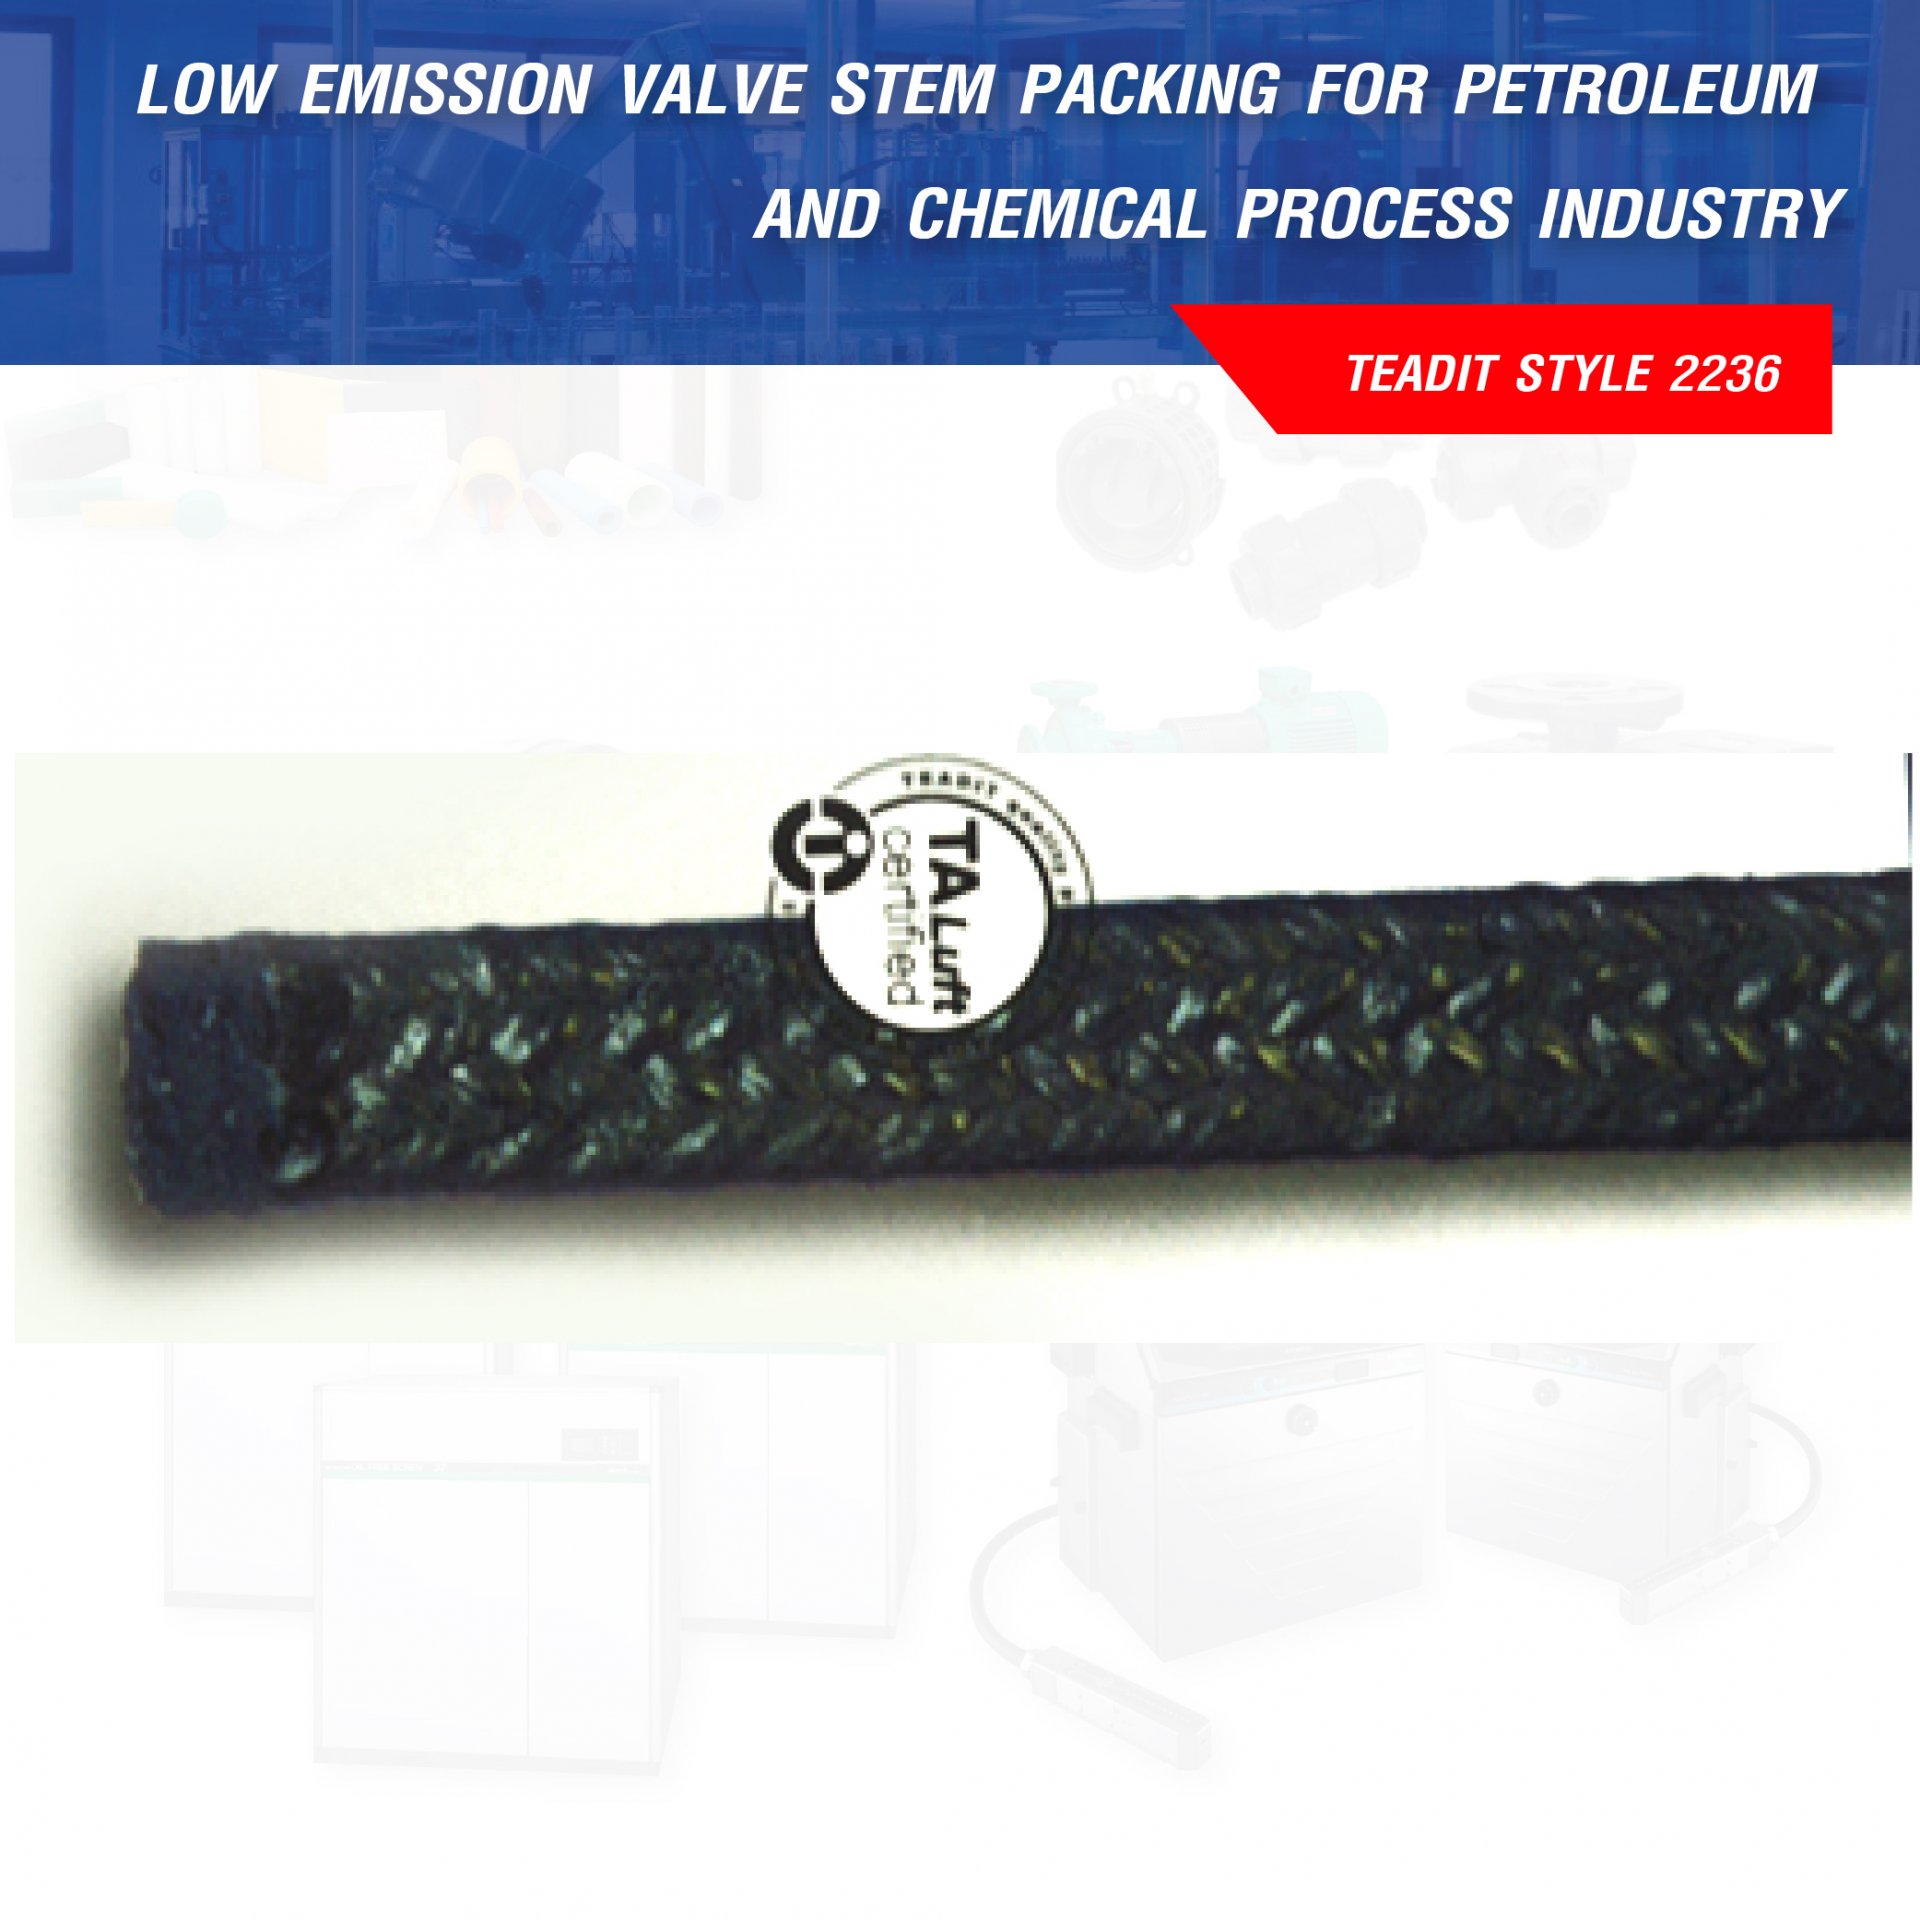 LOW  EMISSION  VALVE  STEM  PACKING  FOR PETROLEUM  AND  CHEMICAL  PROCESS  INDUSTRY